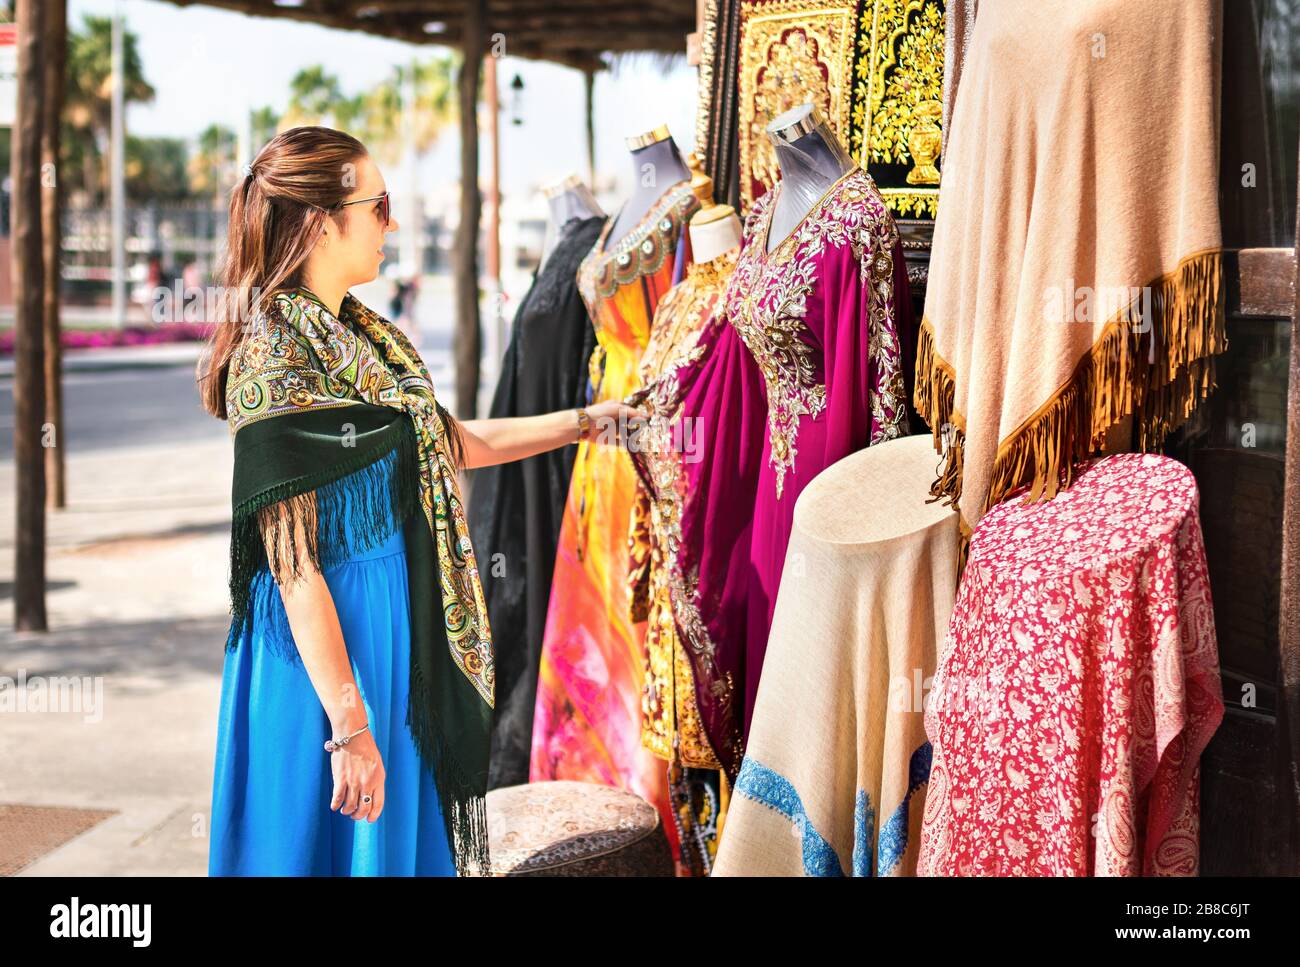 Woman in souk. Tourist looking at traditional Arabian dresses and clothes in store or outdoor market. Lady customer shopping souvenir in old Dubai. Stock Photo